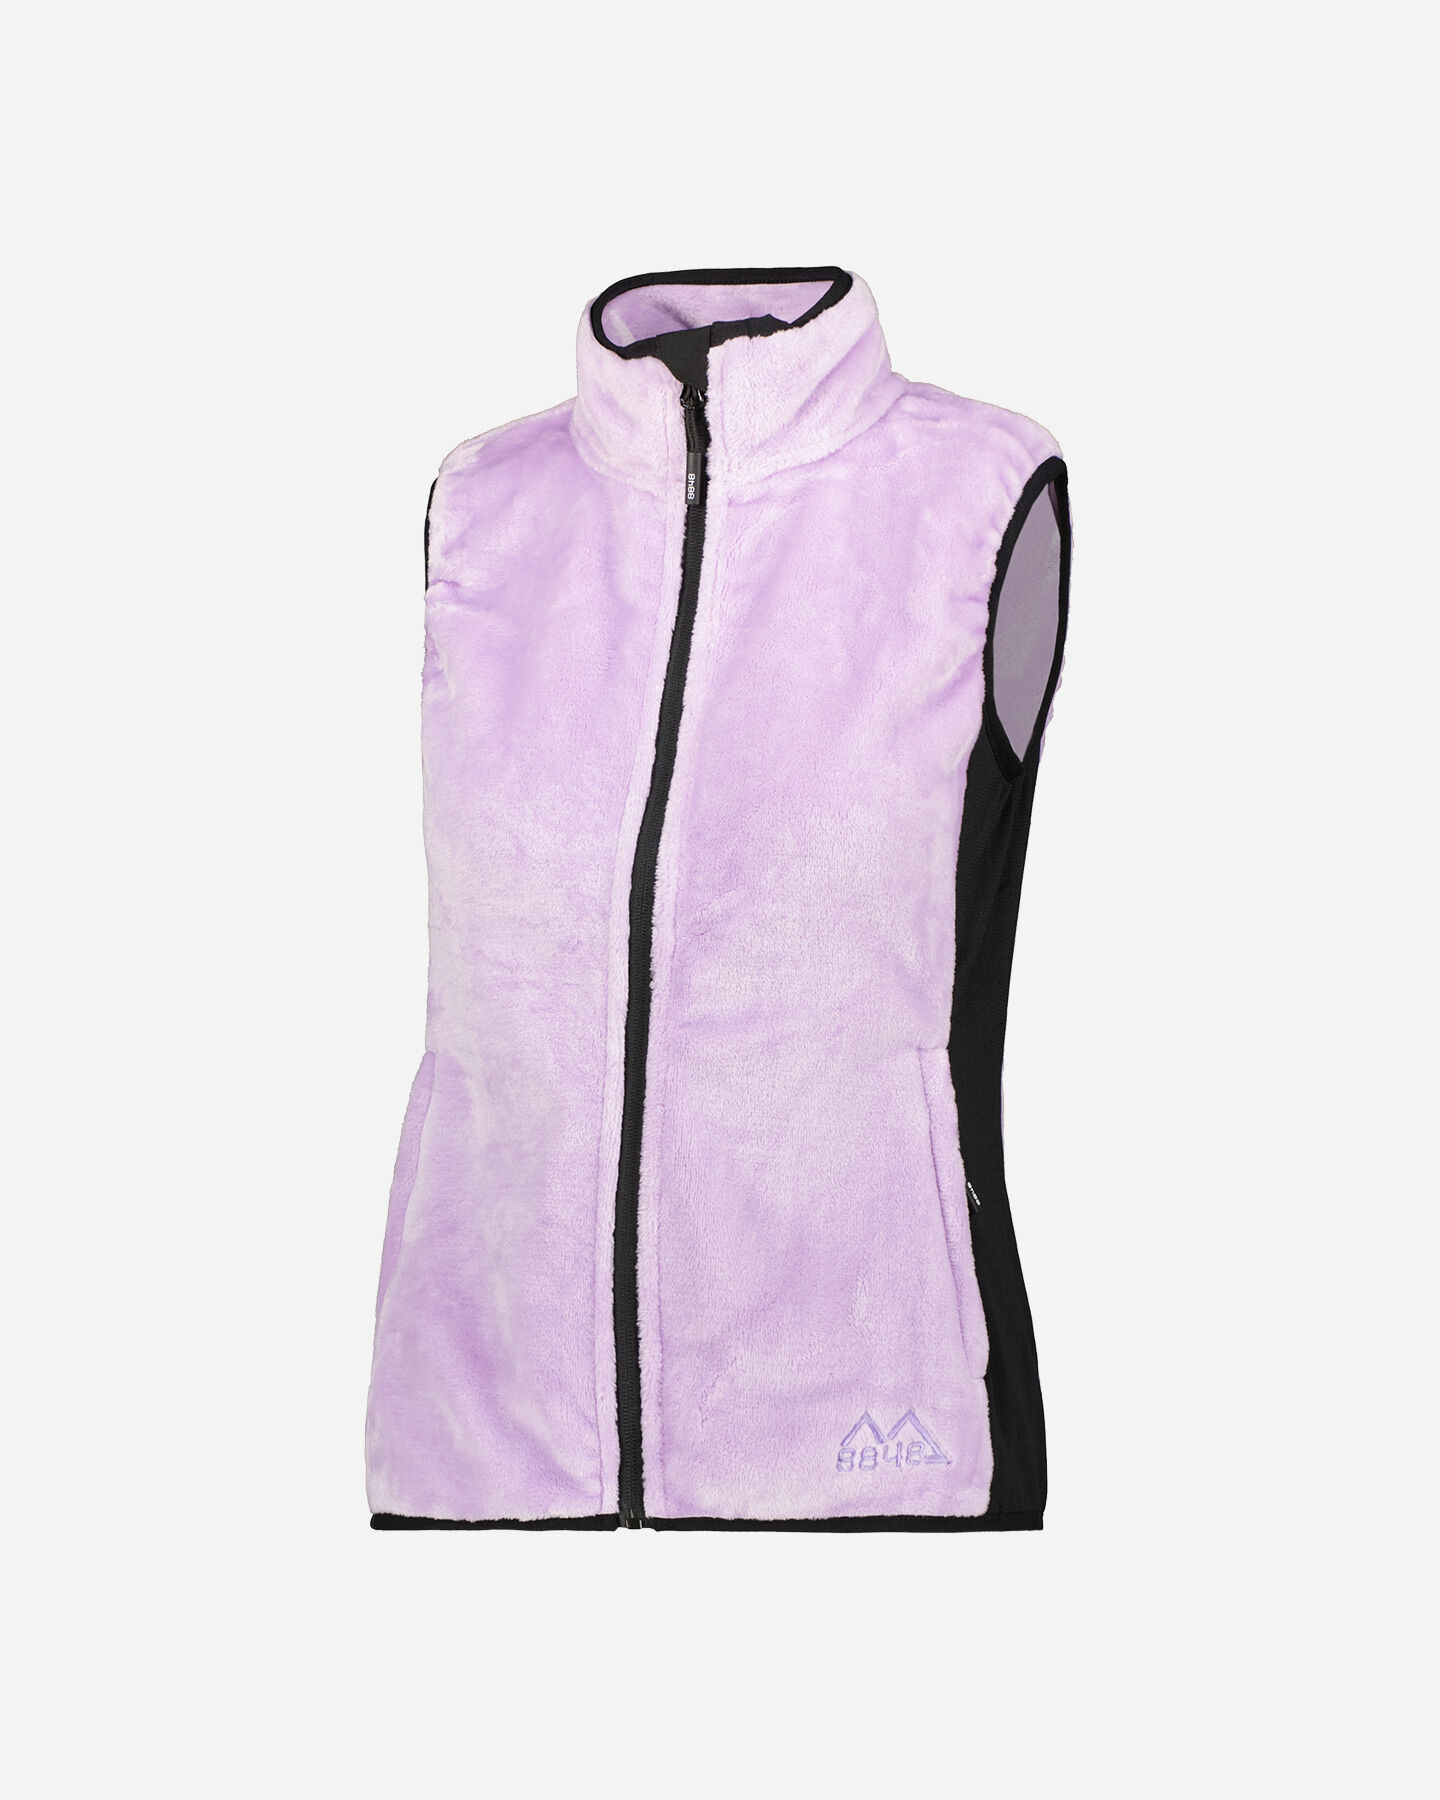  Gilet 8848 SOFT PILE W S4109880|1132/050|XS scatto 5